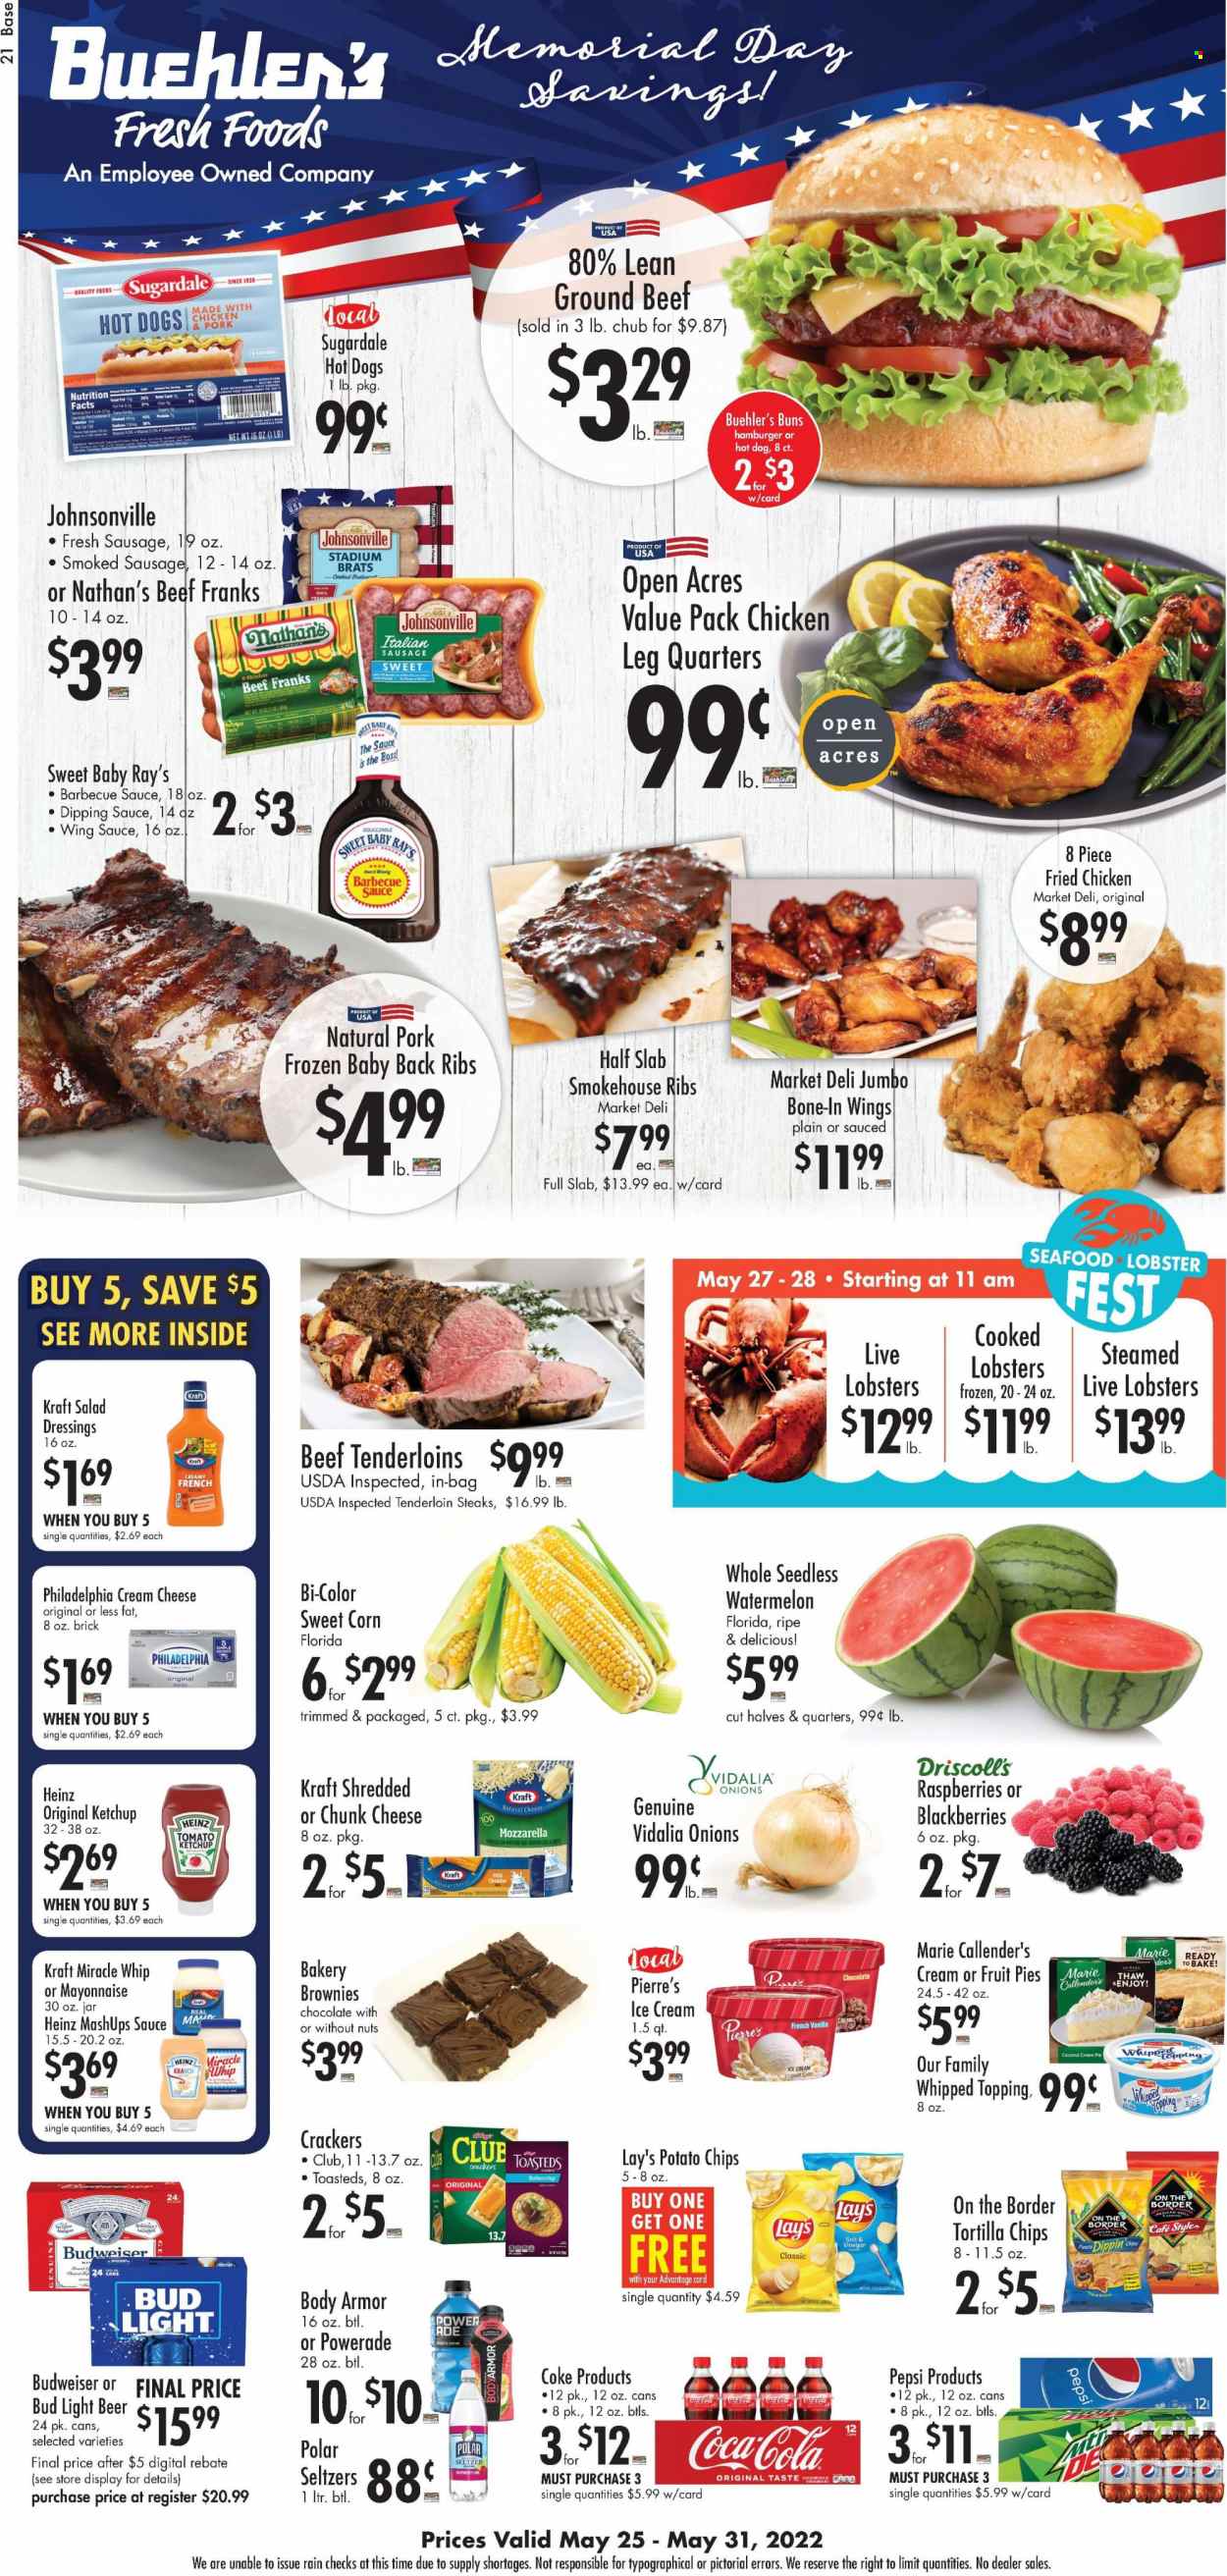 thumbnail - Buehler's Flyer - 05/25/2022 - 05/31/2022 - Sales products - pie, buns, brownies, cream pie, corn, onion, sweet corn, blackberries, watermelon, coconut, lobster, seafood, hot dog, hamburger, fried chicken, Marie Callender's, Kraft®, Sugardale, Johnsonville, sausage, smoked sausage, italian sausage, cream cheese, mild cheddar, mozzarella, Philadelphia, cheese, chunk cheese, mayonnaise, Miracle Whip, ice cream, crackers, tortilla chips, potato chips, Lay’s, topping, Heinz, BBQ sauce, salad dressing, ketchup, wing sauce, Coca-Cola, Powerade, Pepsi, Body Armor, seltzer water, beer, Bud Light, chicken legs, beef meat, ground beef, steak, pork meat, pork ribs, pork back ribs, bag, Budweiser. Page 1.